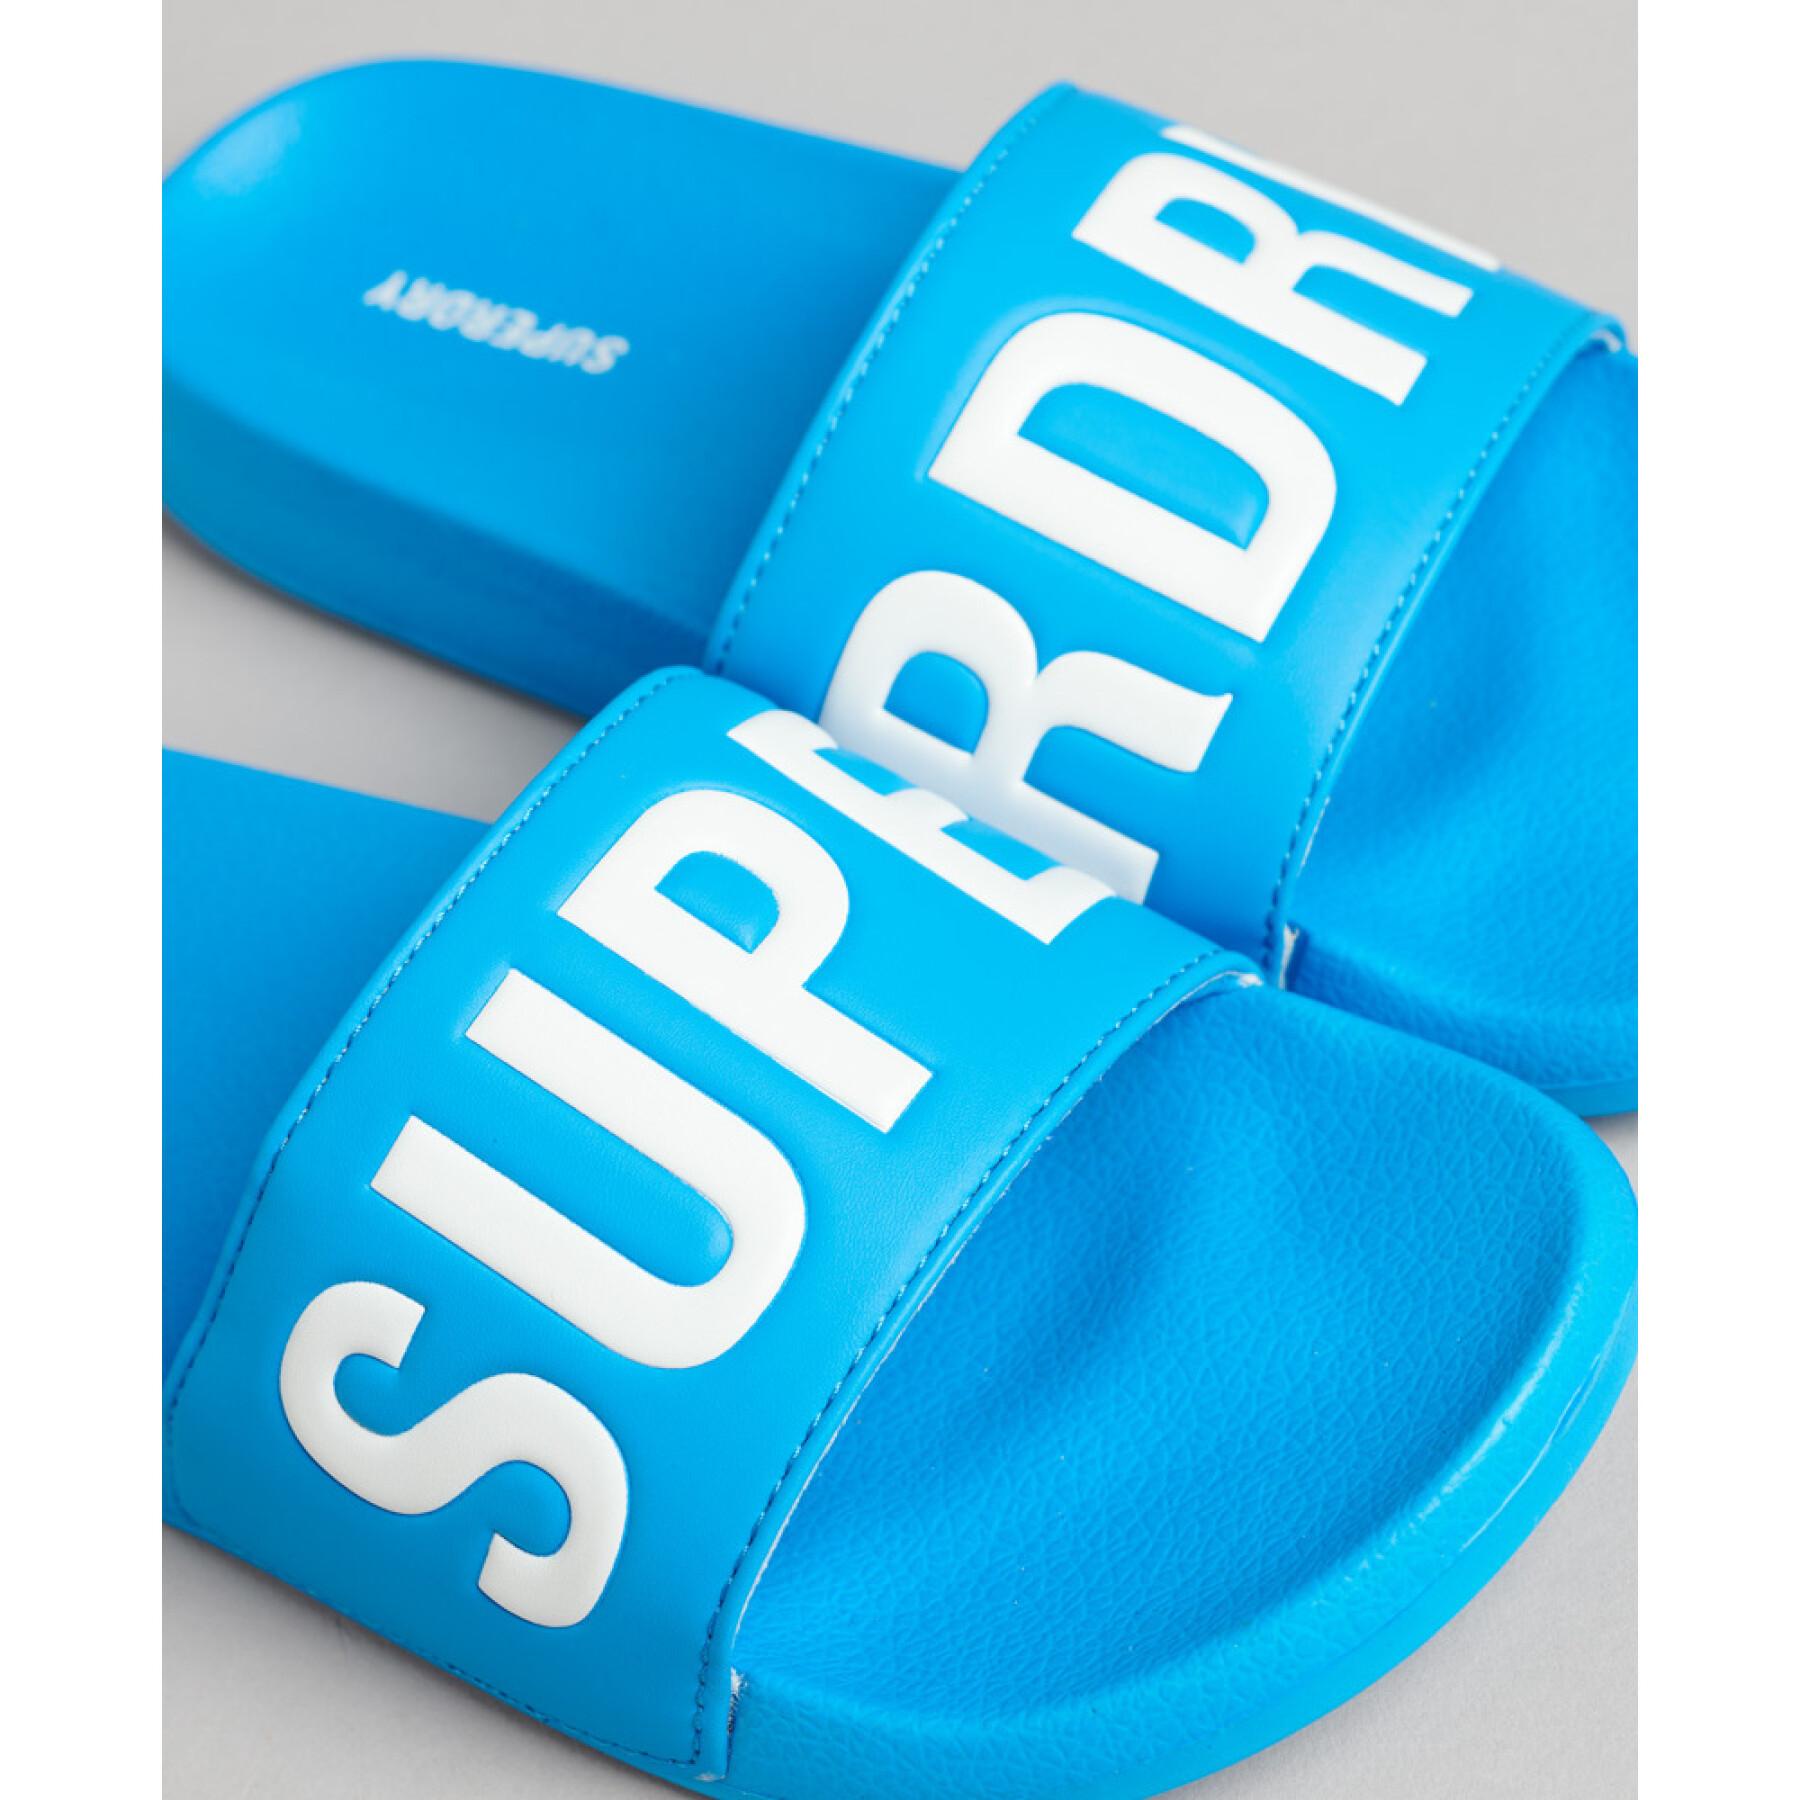 Women's pool slippers Superdry Core